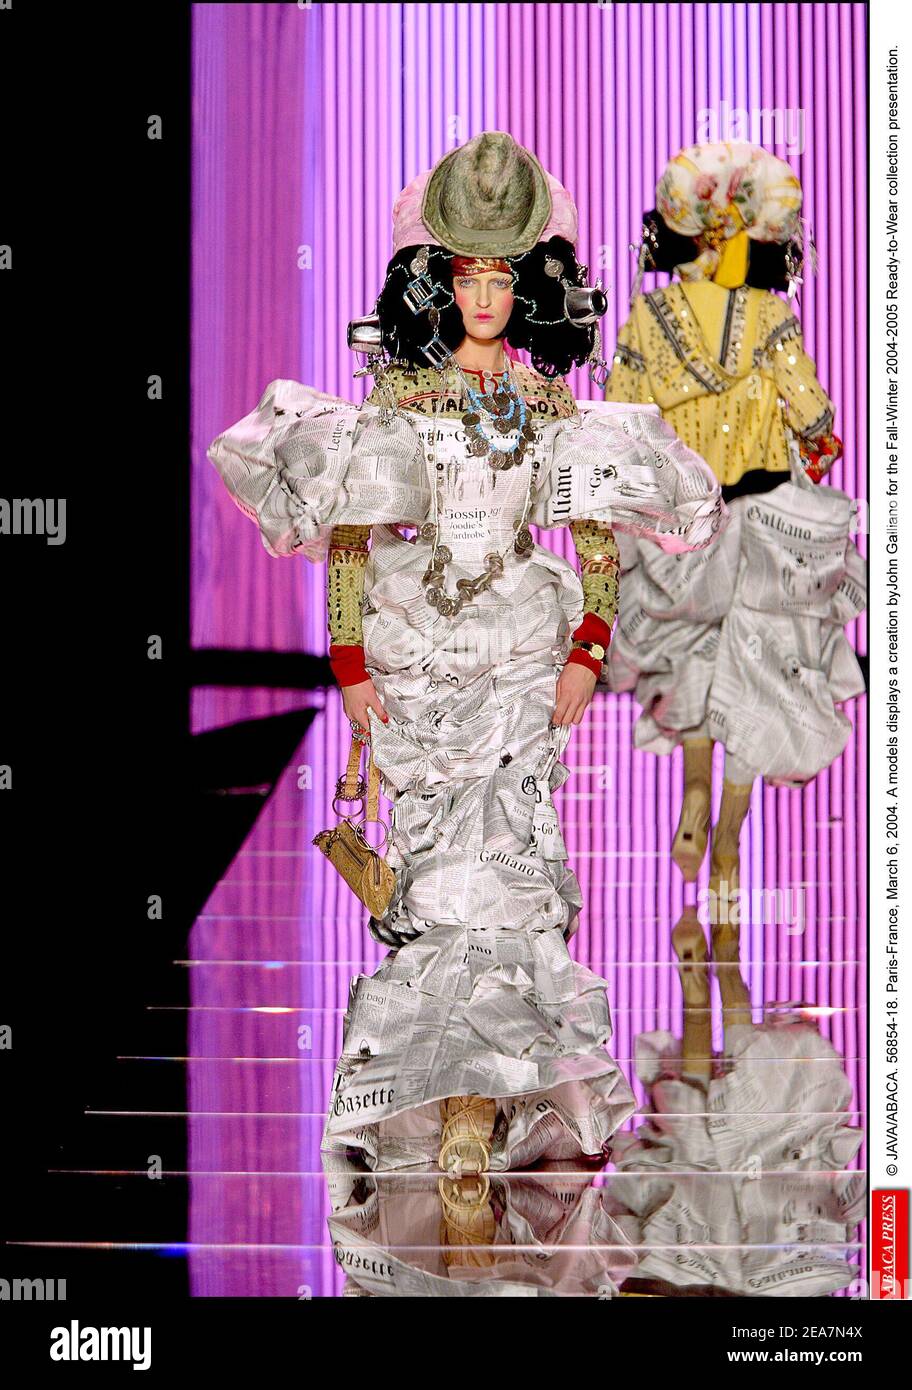 © JAVA/ABACA. 56854. Paris-France, March 6, 2004. A model displays a creation by John Galliano for his Fall-Winter 2004-2005 Ready-to-Wear collection presentation. Stock Photo